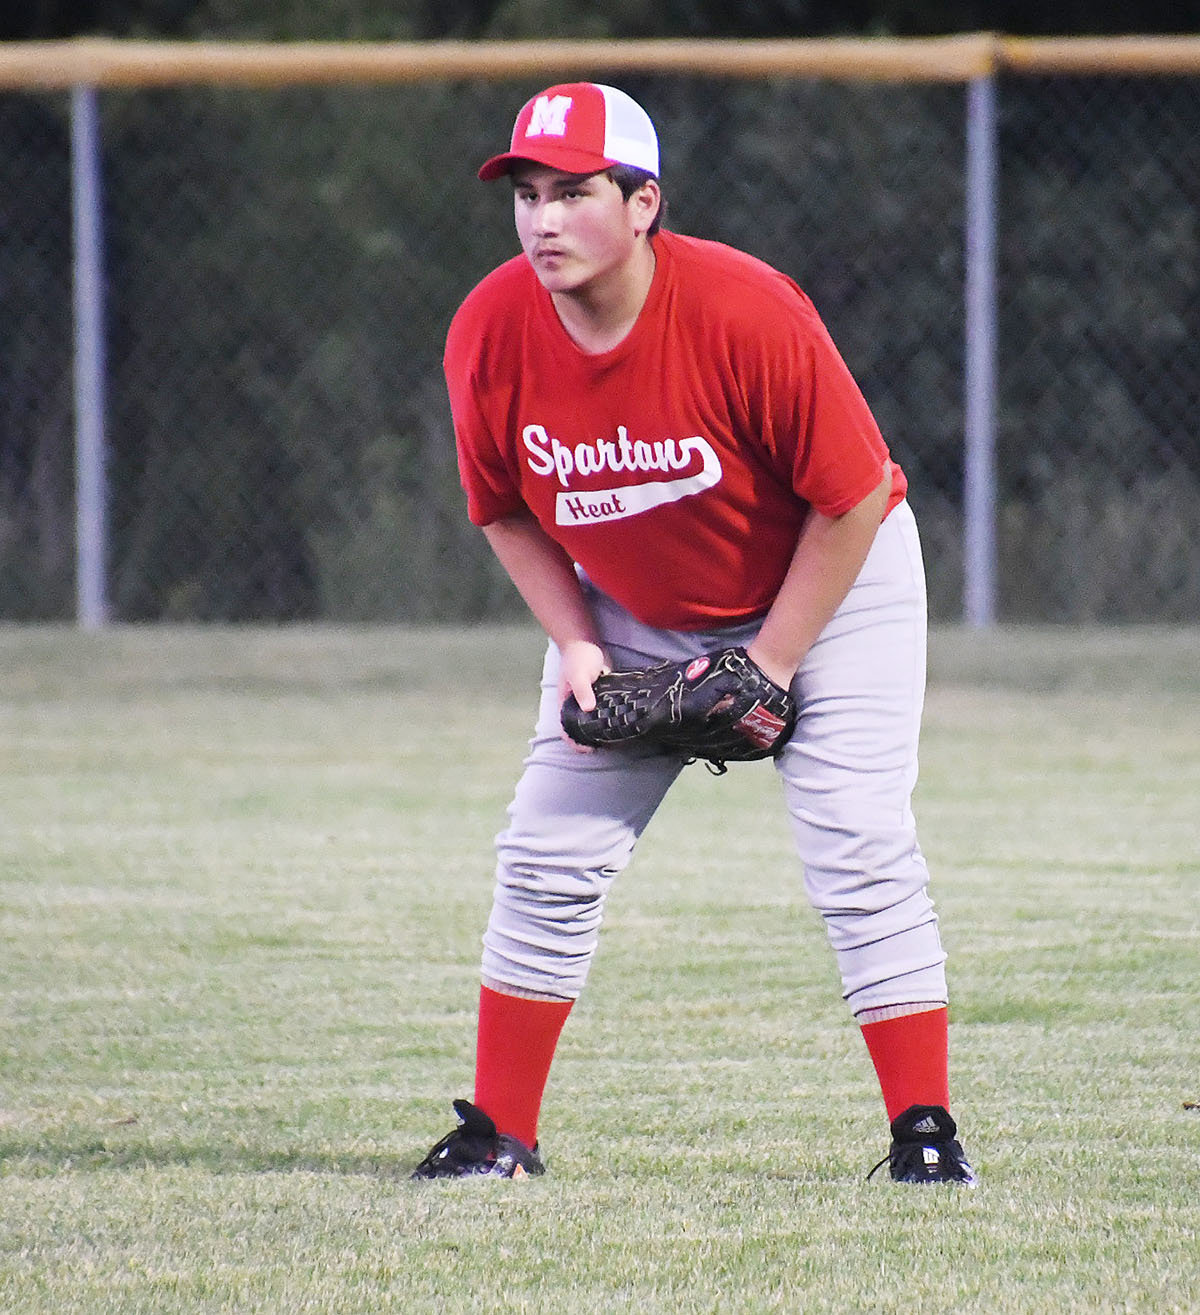 Enrique Salazar prepares while playing the position of right field for the Spartan Heat.